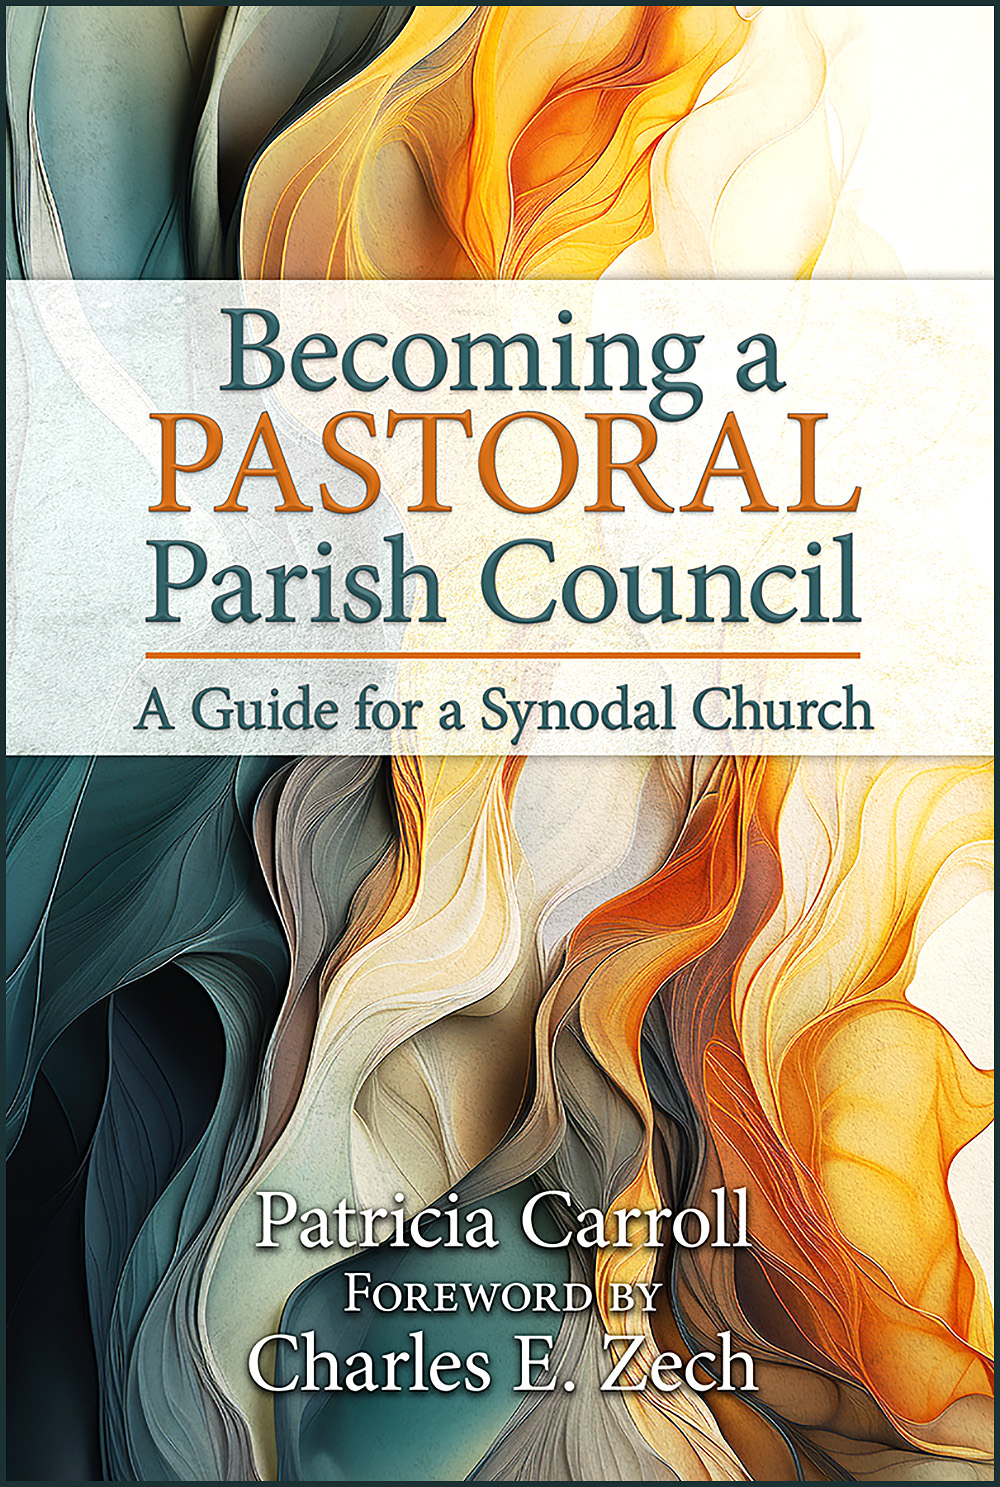 Becoming a Pastoral Parish Council A Guide for a Synodal Church